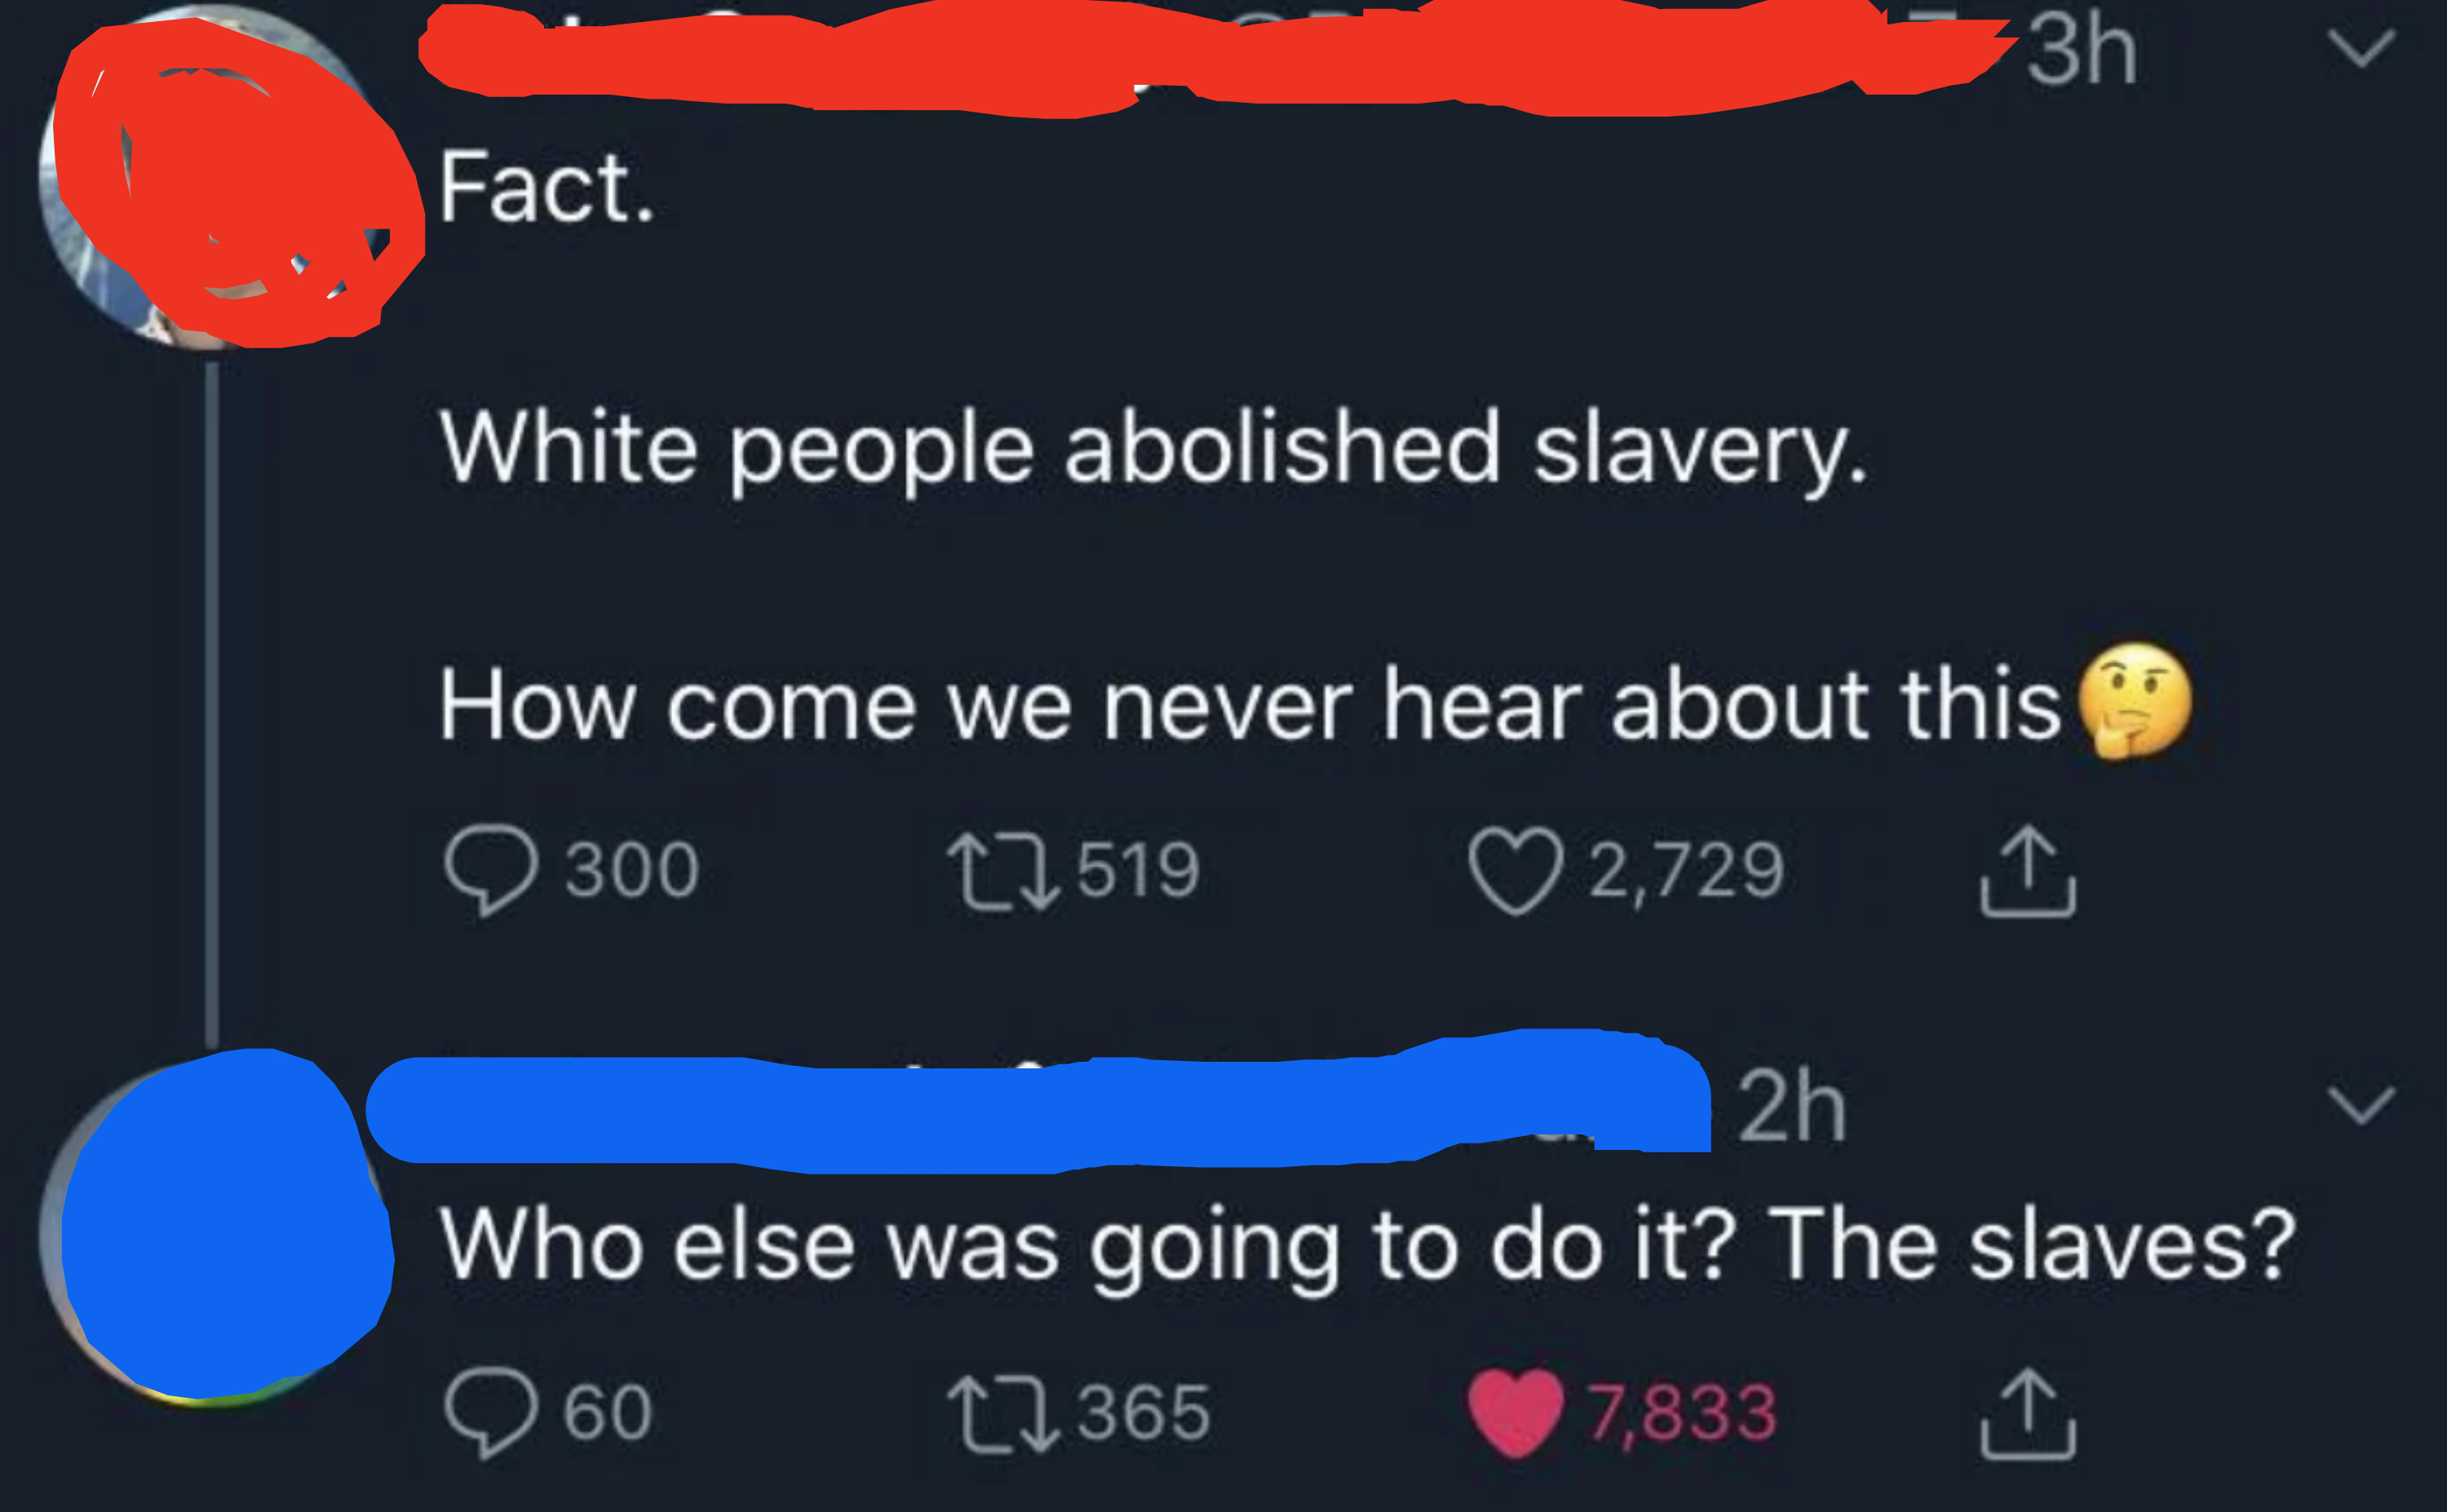 person 1: fact. white people abolished slavery, how come we never hear about this? person 2: who else was going to do it? the slaves?